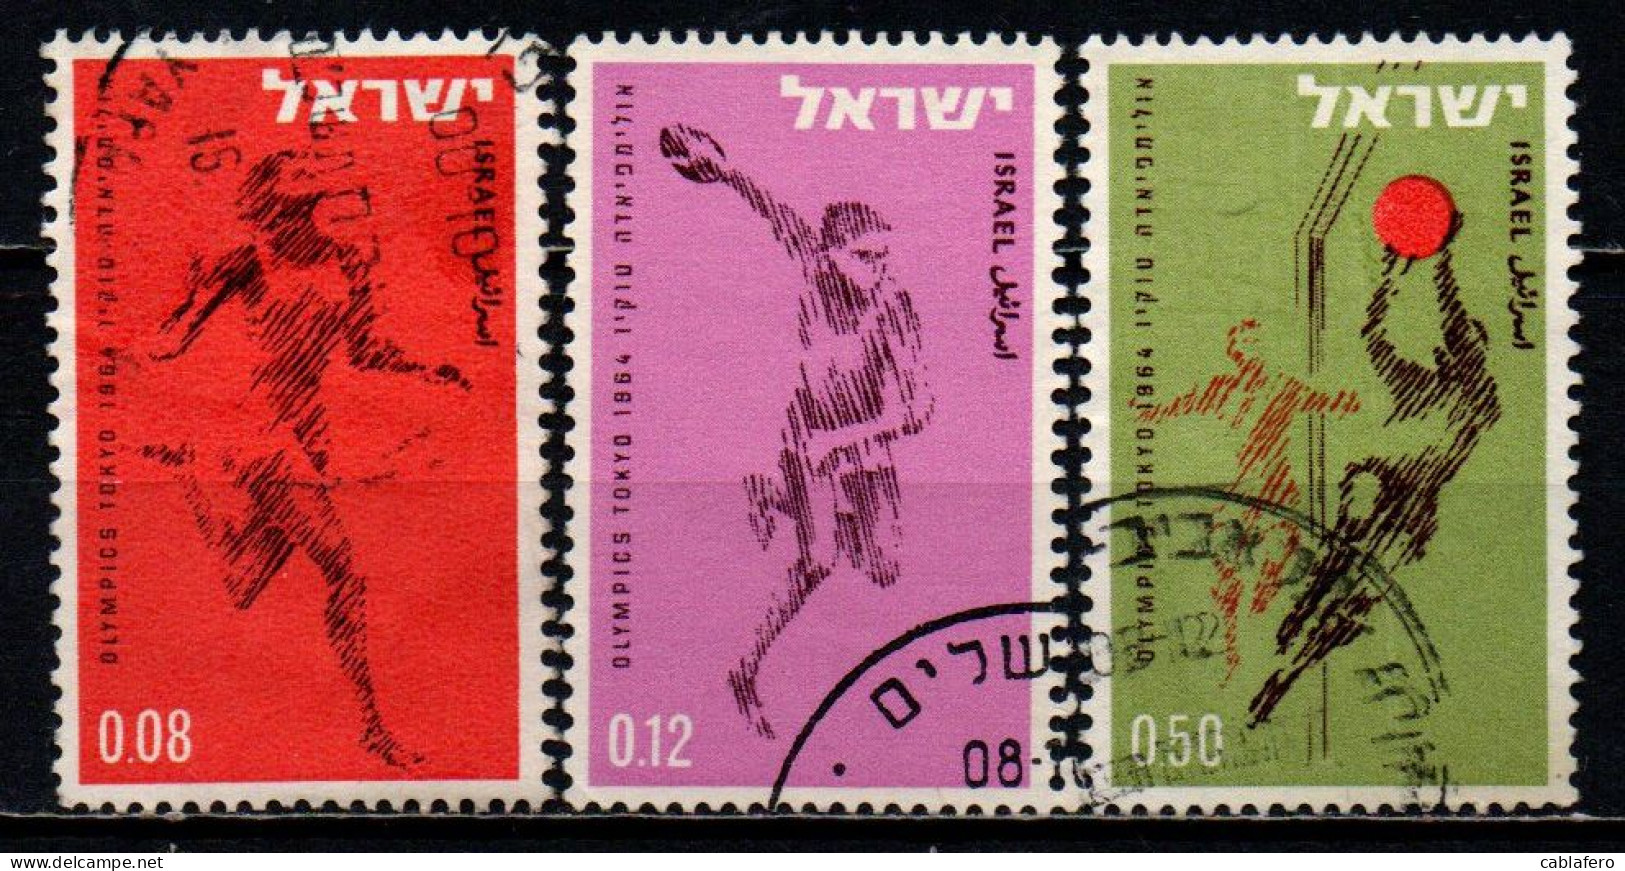 ISRAELE - 1964 - Israel’s Participation In The 18th Olympic Games, Tokyo, Oct. 10-25 - USATI - Oblitérés (sans Tabs)